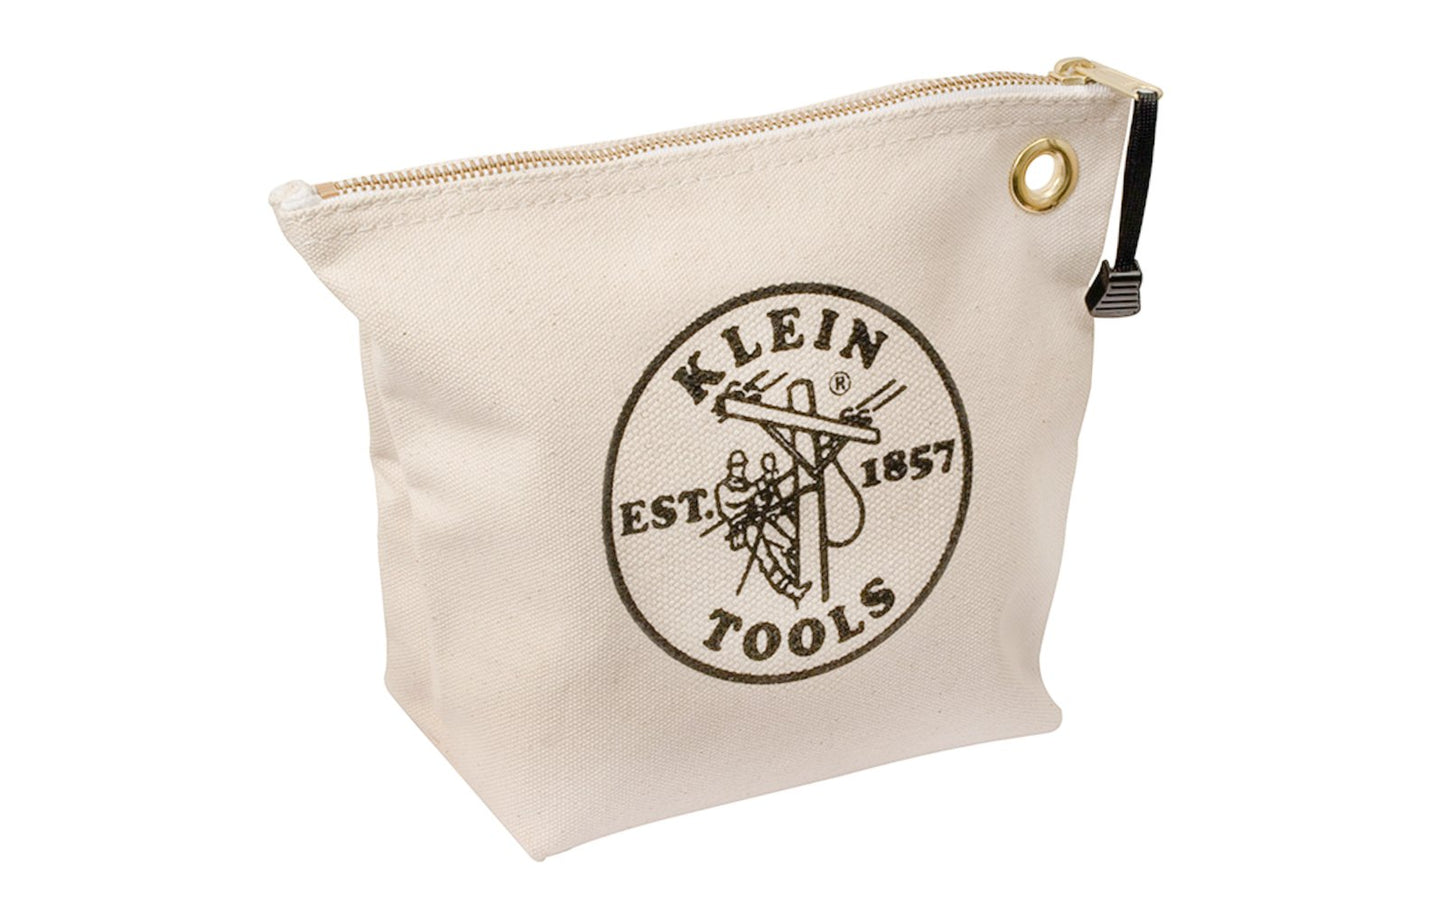 Klein Tools - Made in USA ~ Model 5539NAT - Tough Canvas material - Klein Canvas Pouch - Large Klein Canvas Bag - Storage for pliers, wrenches, & other tools - Klein Canvas Zipper Bag - Made with tough No. 8 canvas for added durability - Heavy-duty zipper - 092644552632 - Canvas Zipper Bags, Consumables - Wide Bottom - 10"  x  8"  x  3-1/2" 